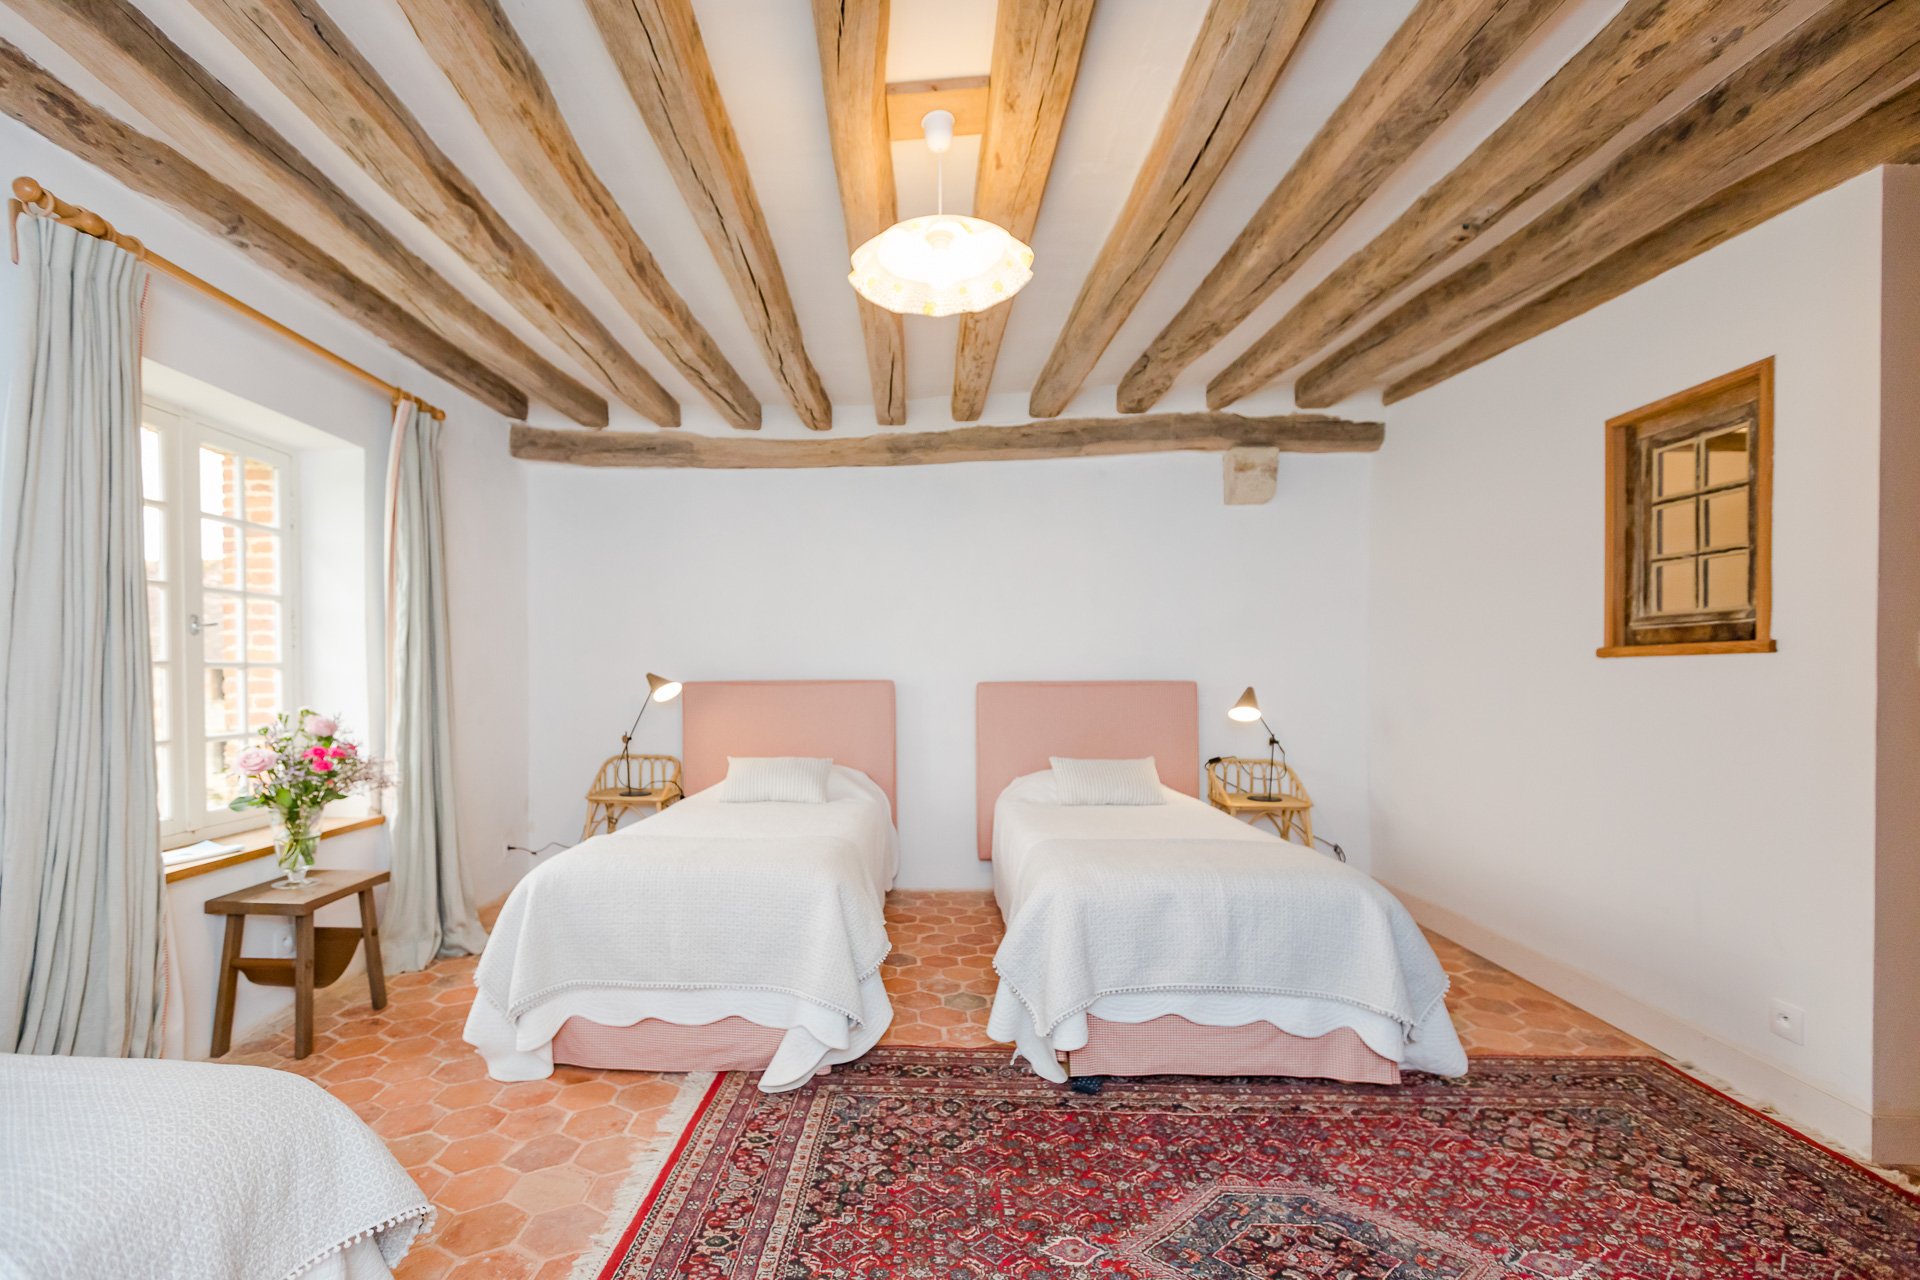  A light,airy twin bedded room, in the cozy beamed Farmhouse on the Courtomer estate.